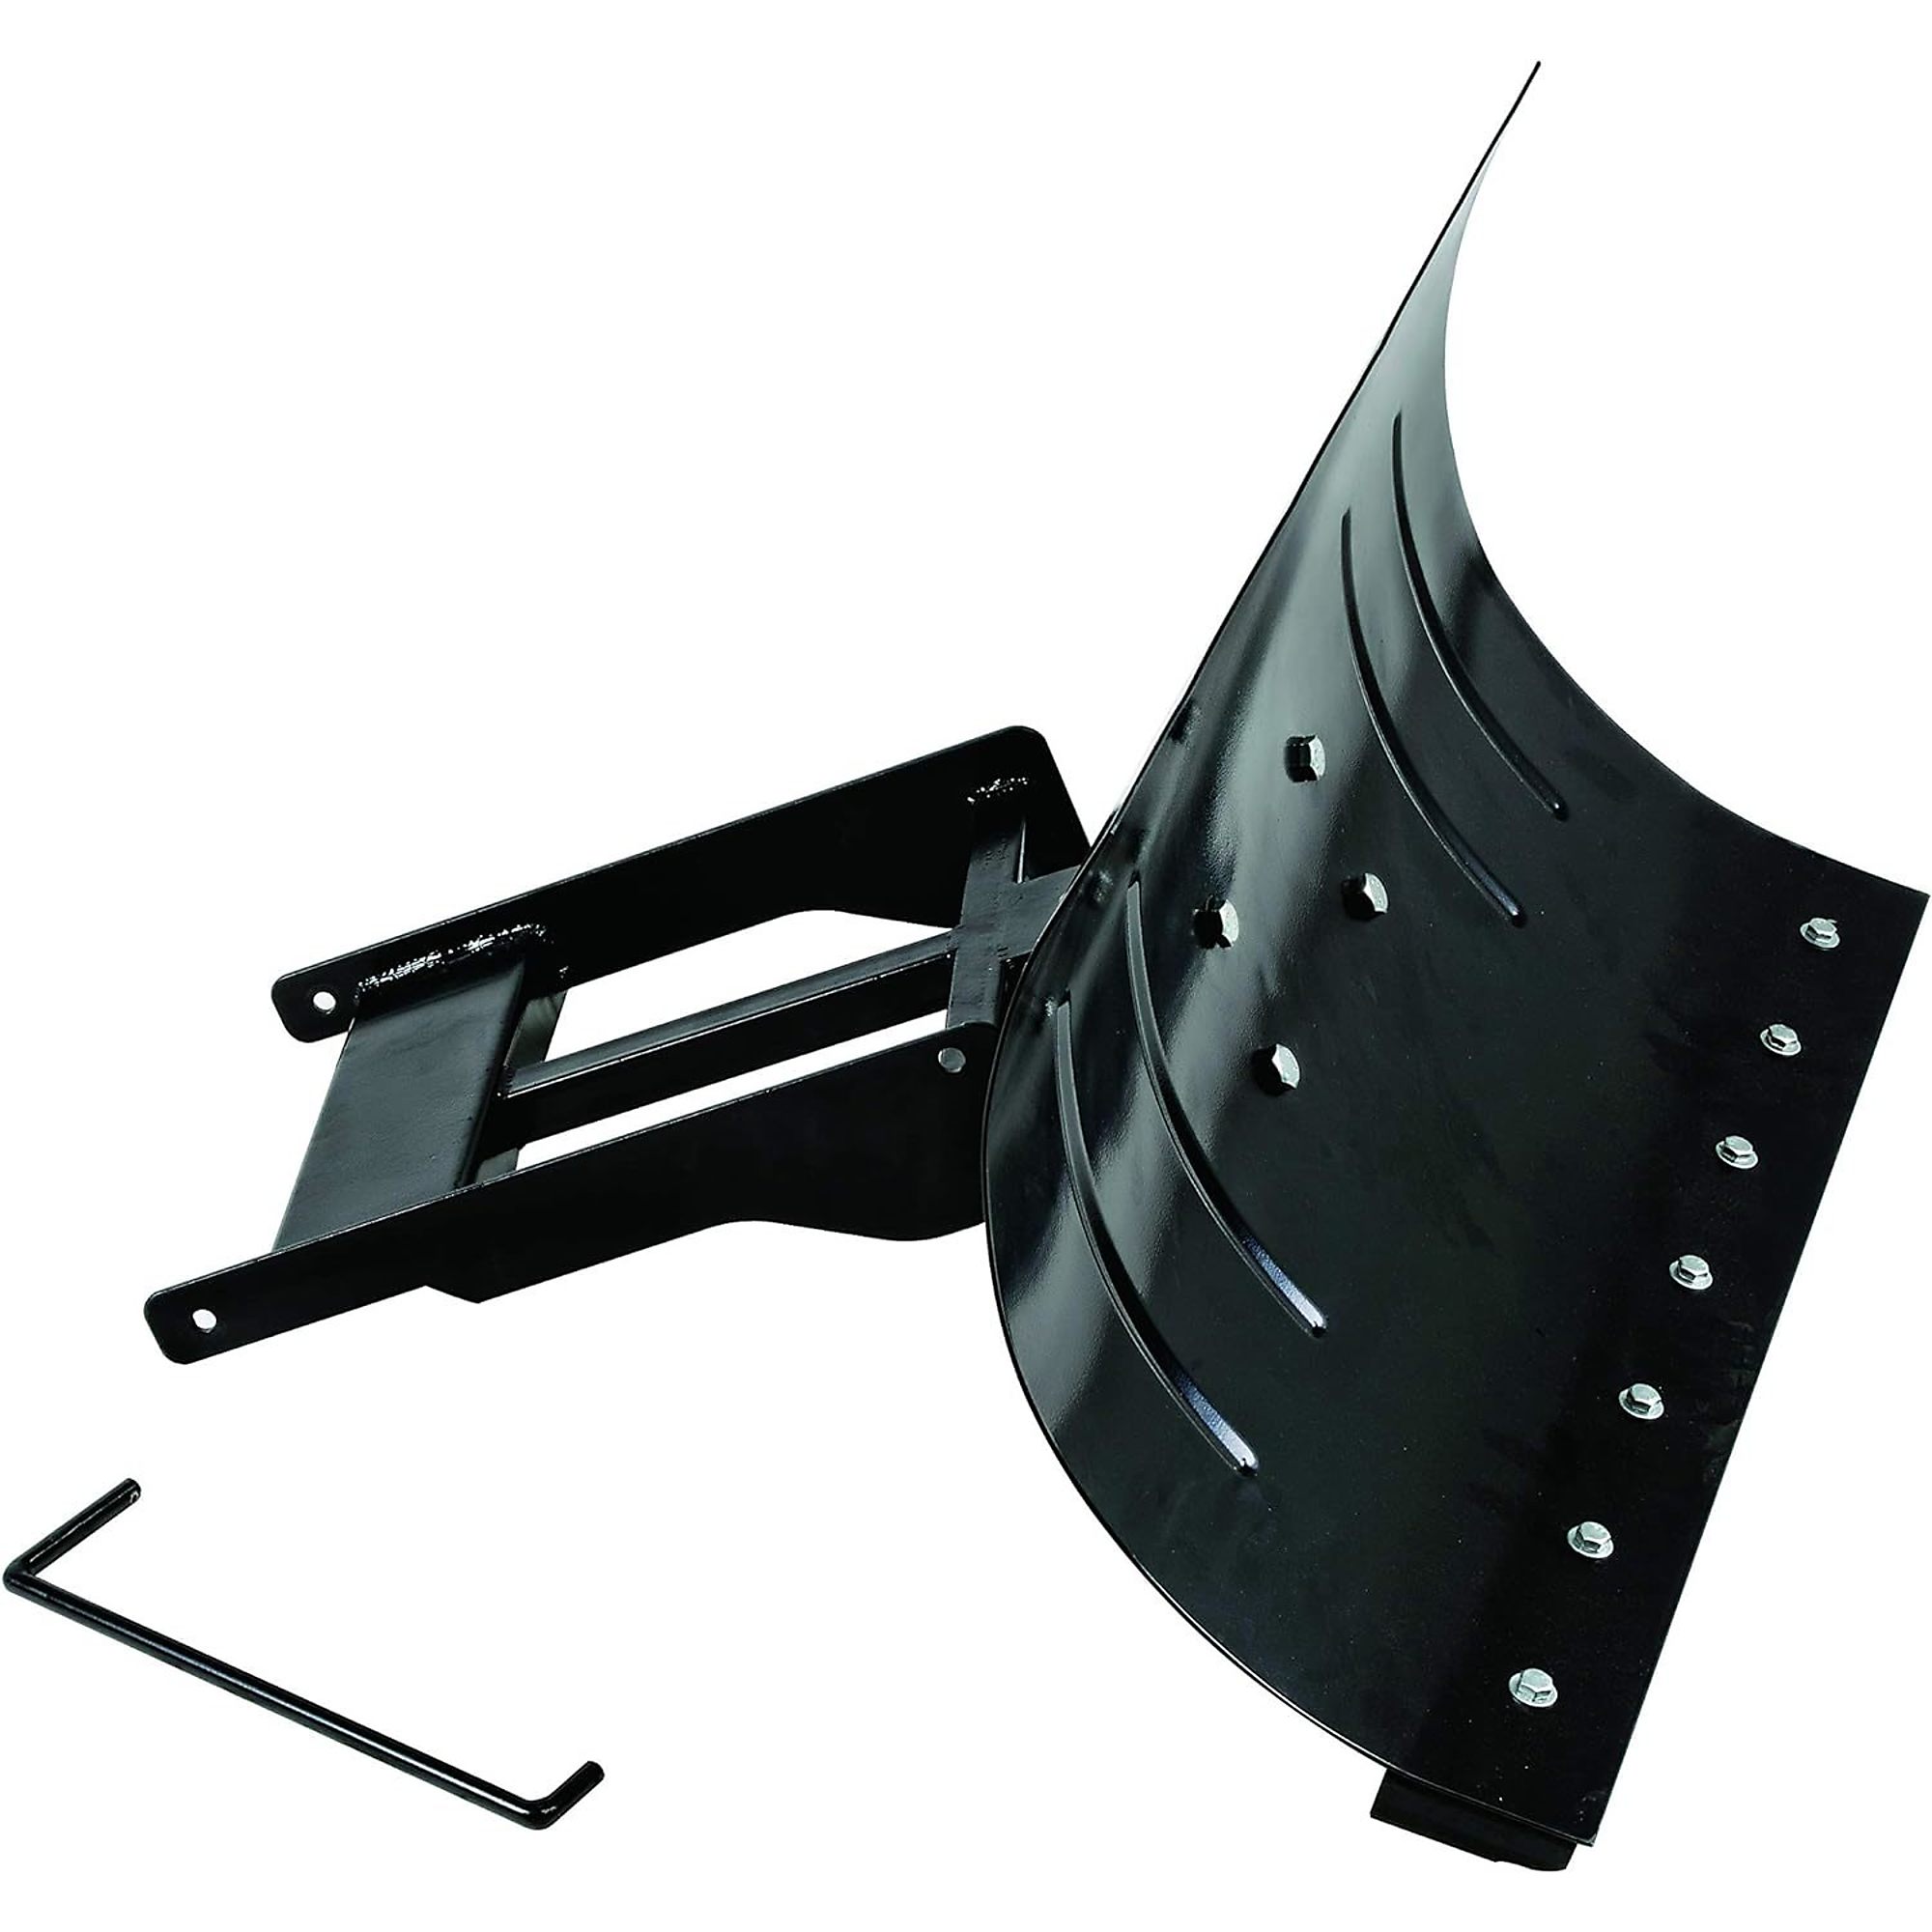 Landworks, Mountable Snow Plow Attachment, Material Steel, Length 2.42 ft, Model TRI-GUO027